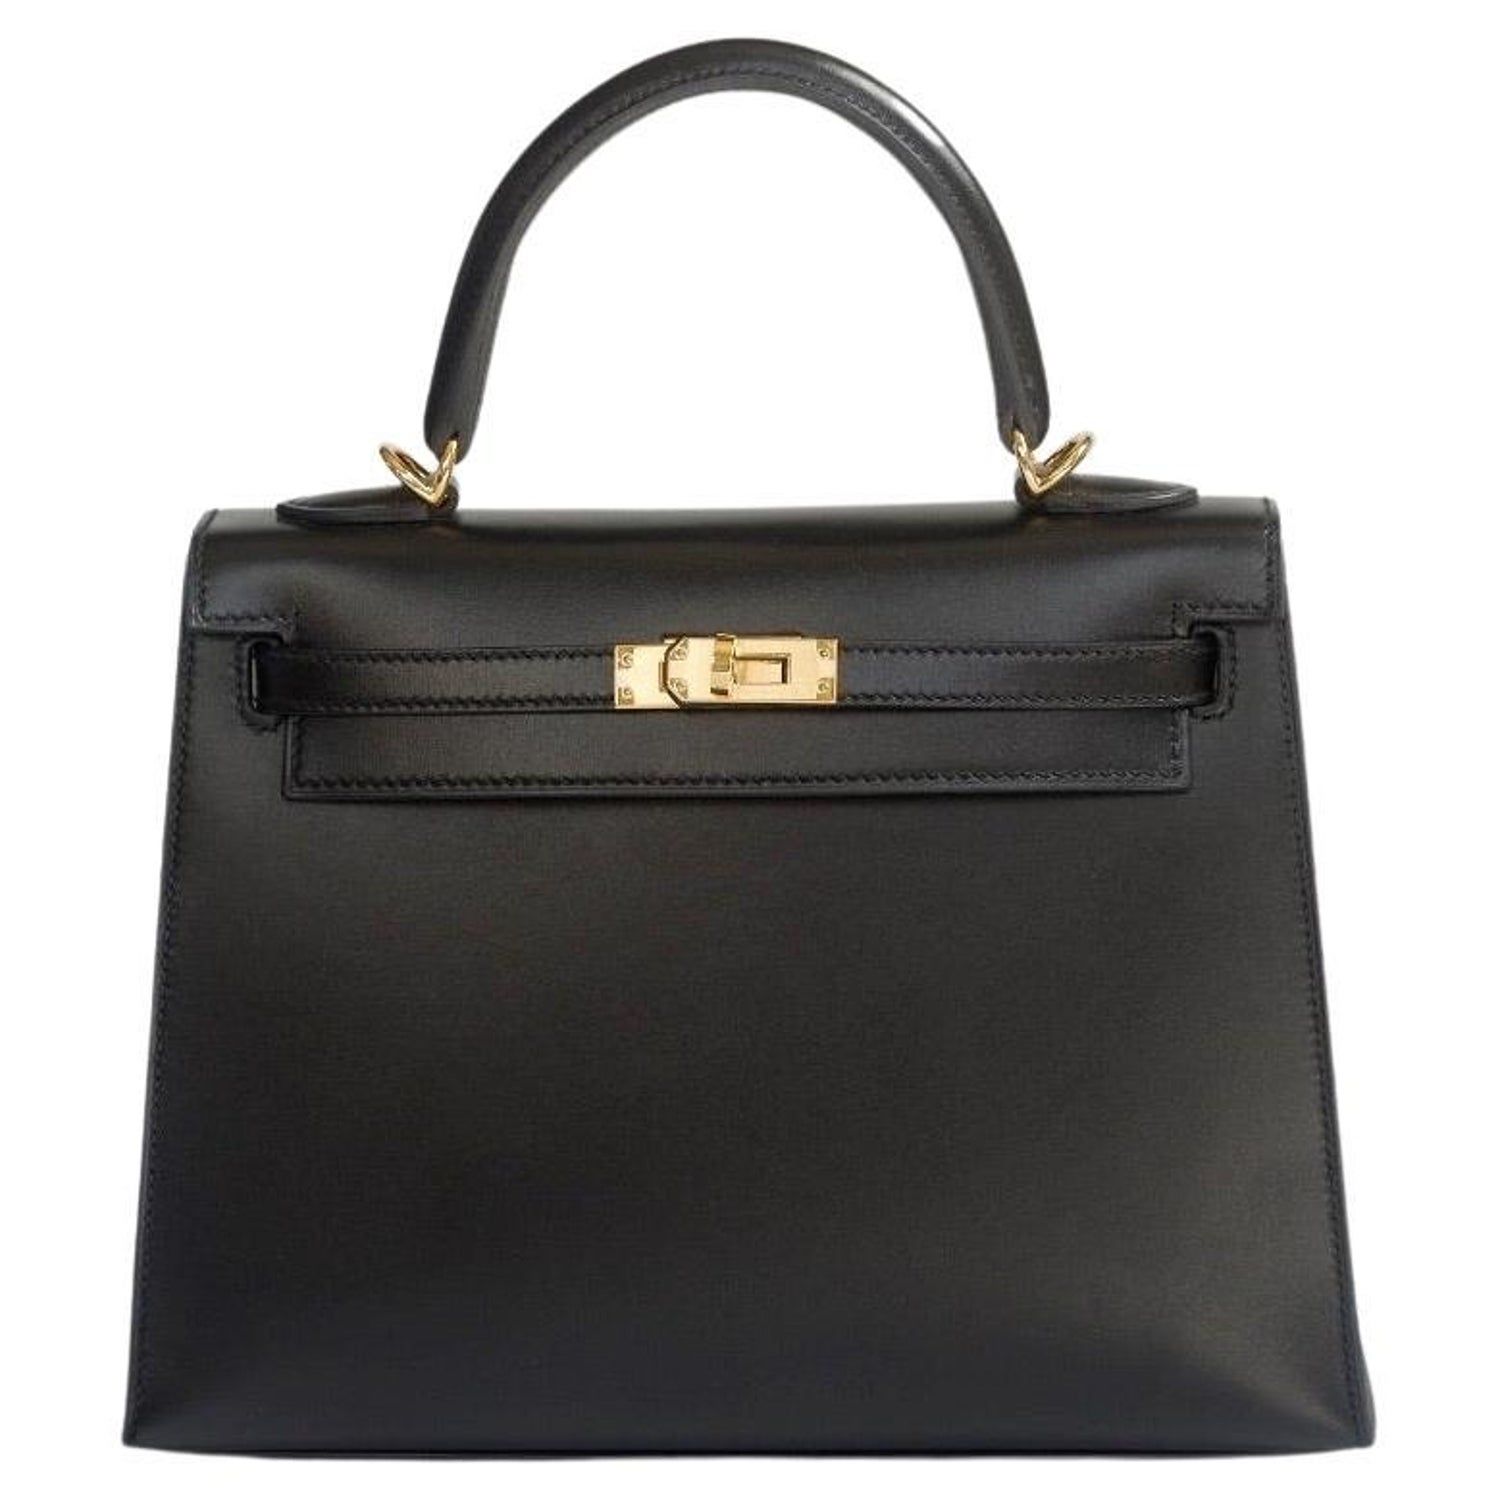 Hermes Black is an eternal classic that transcends fashion.